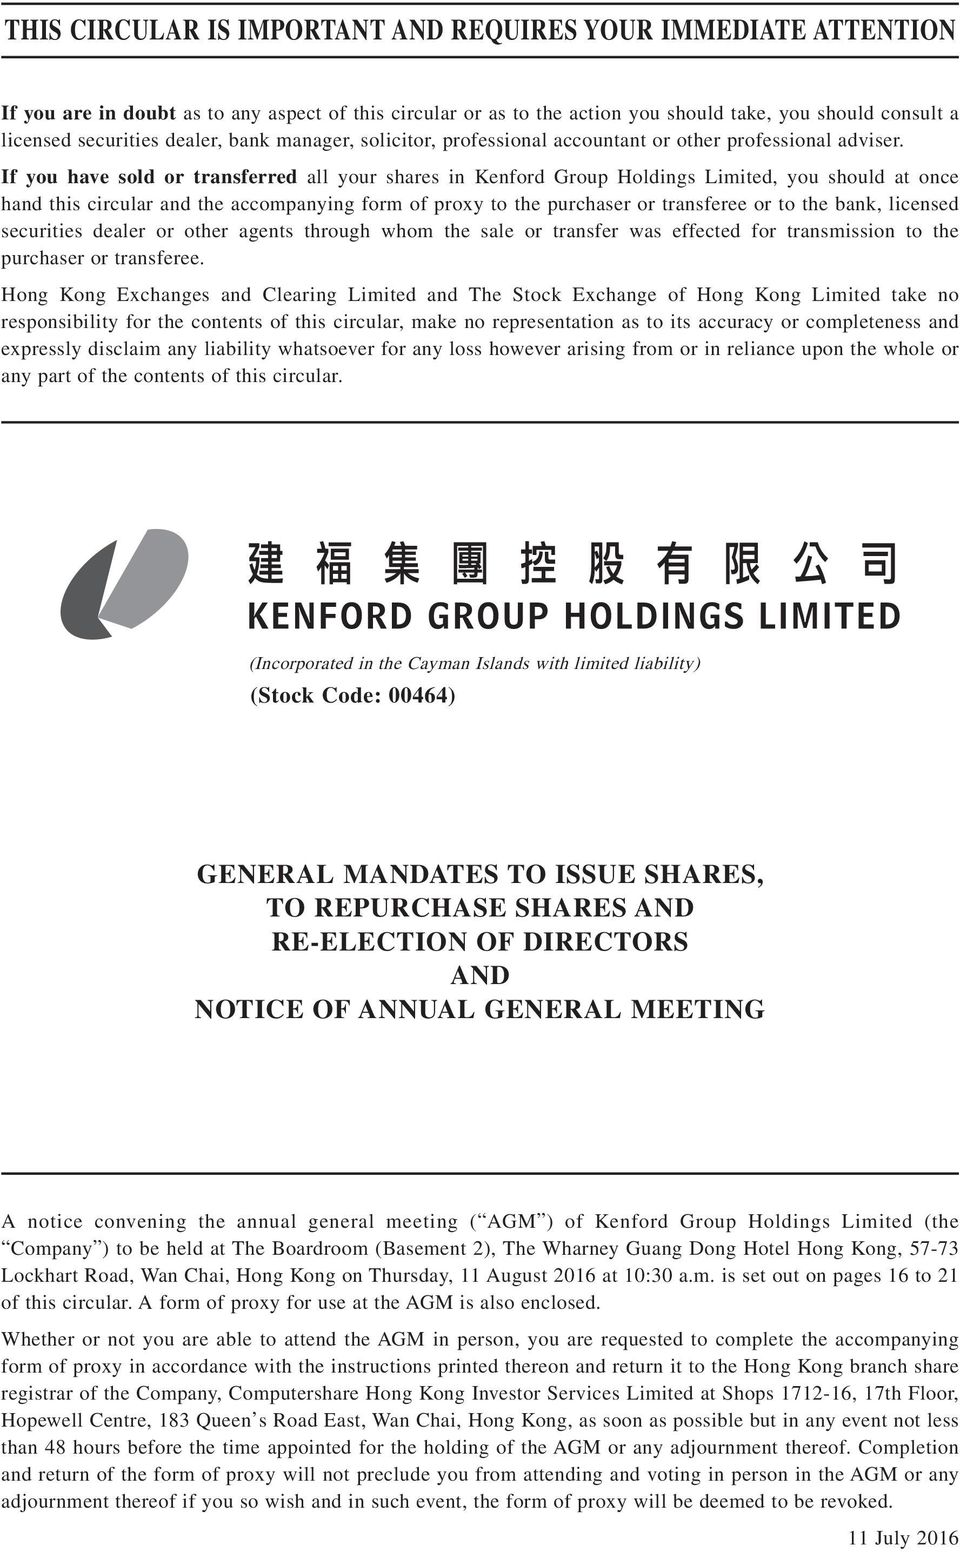 If you have sold or transferred all your shares in Kenford Group Holdings Limited, you should at once hand this circular and the accompanying form of proxy to the purchaser or transferee or to the